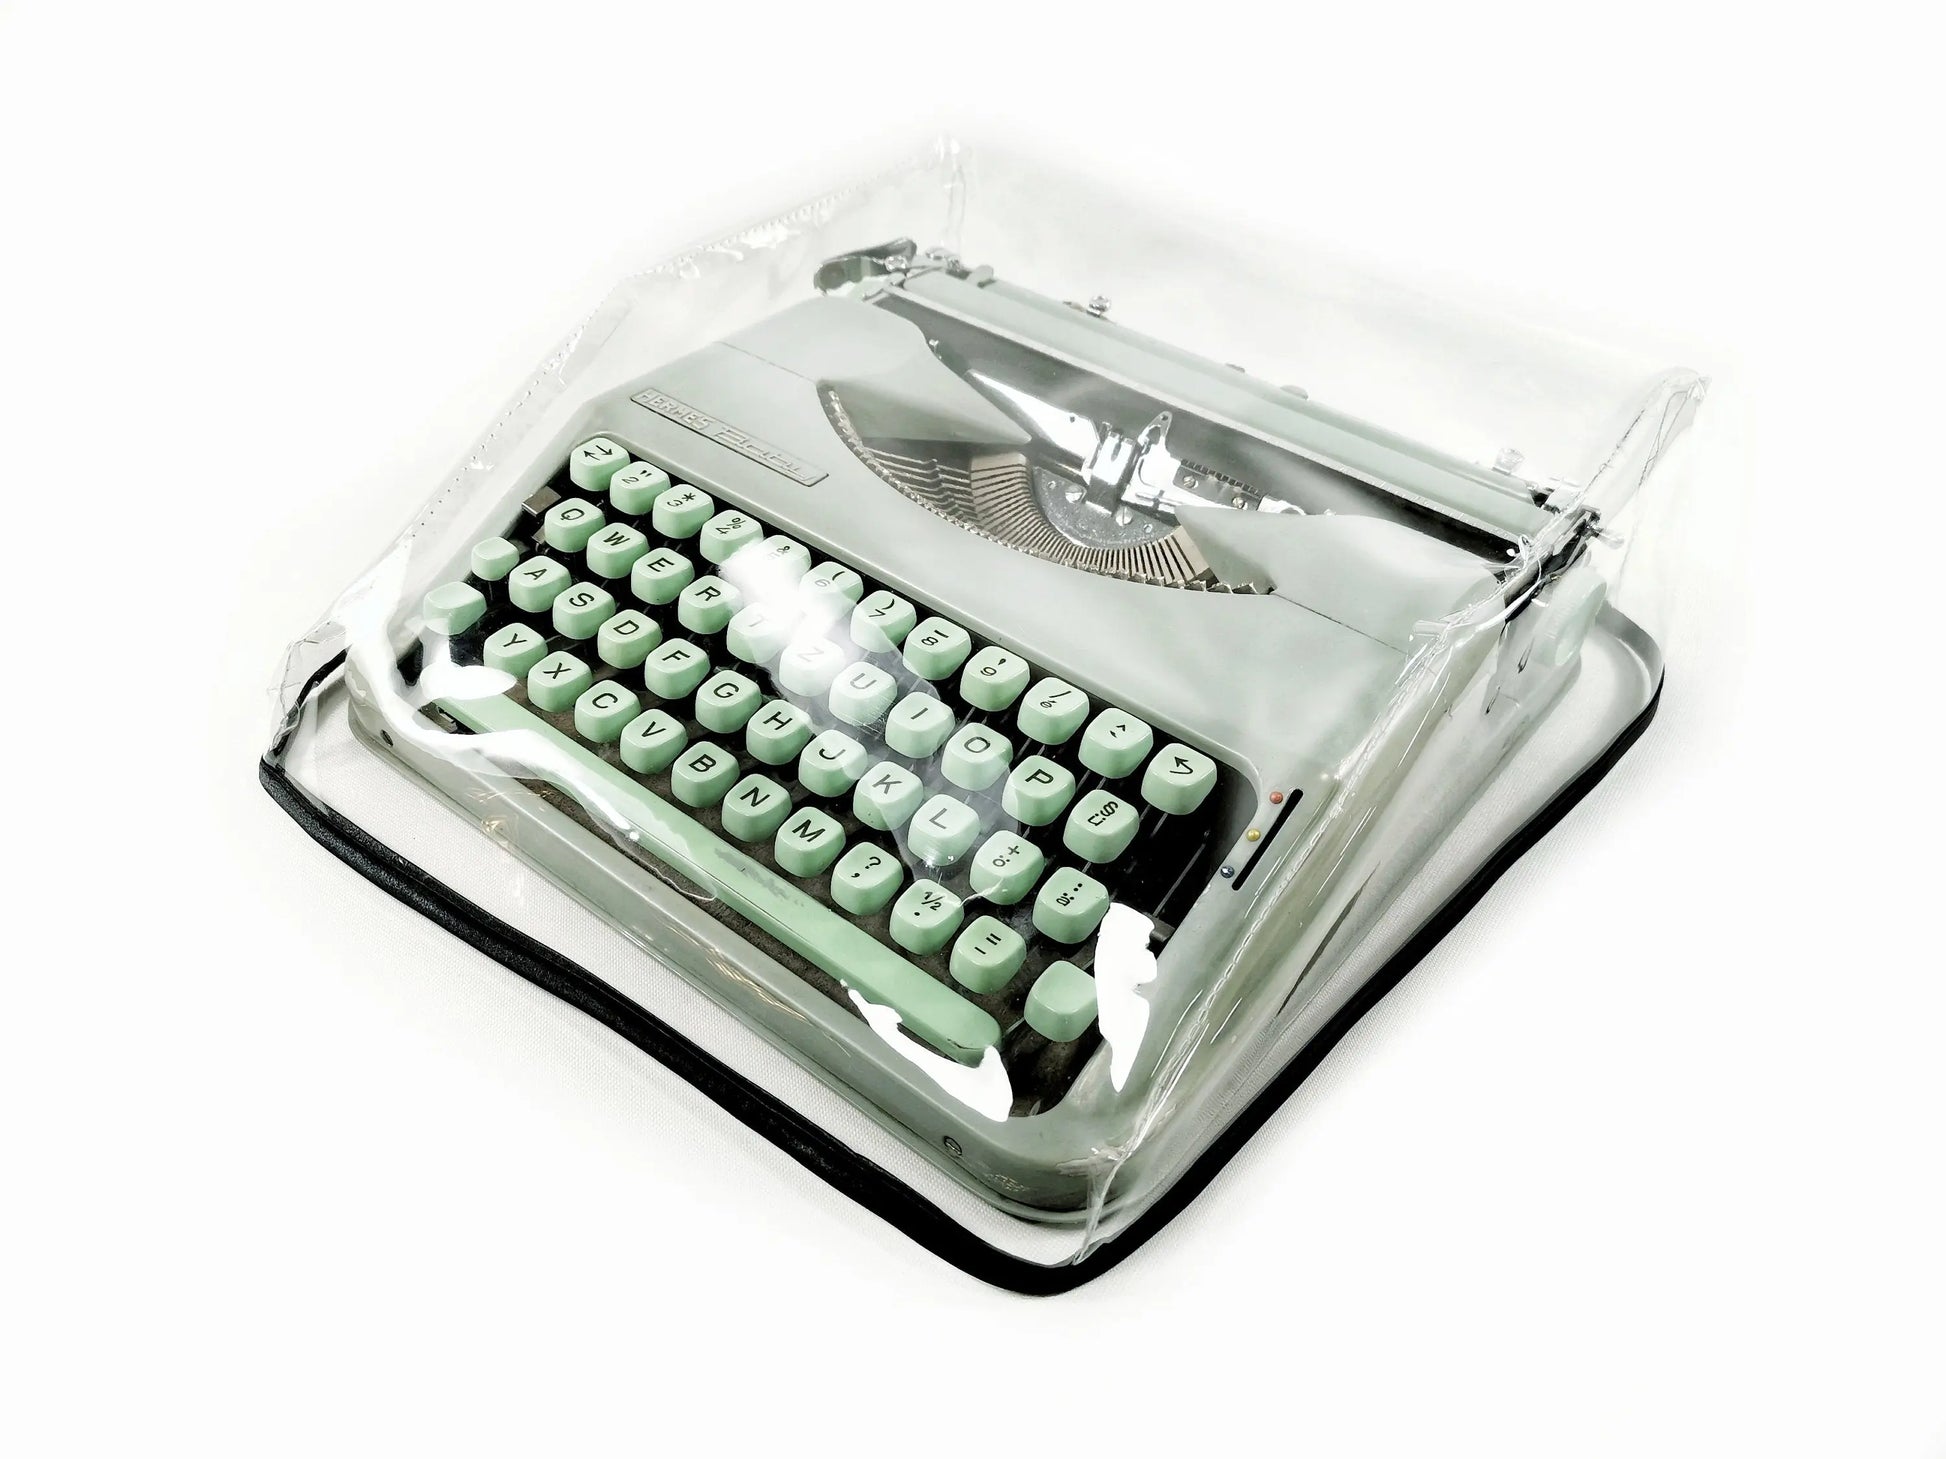 SMALL Transparent Dust Cover, Vinyl PVC for S size Manual Typewriter Hermes Baby, Adler Triumph Tippa - ElGranero Typewriter.Company